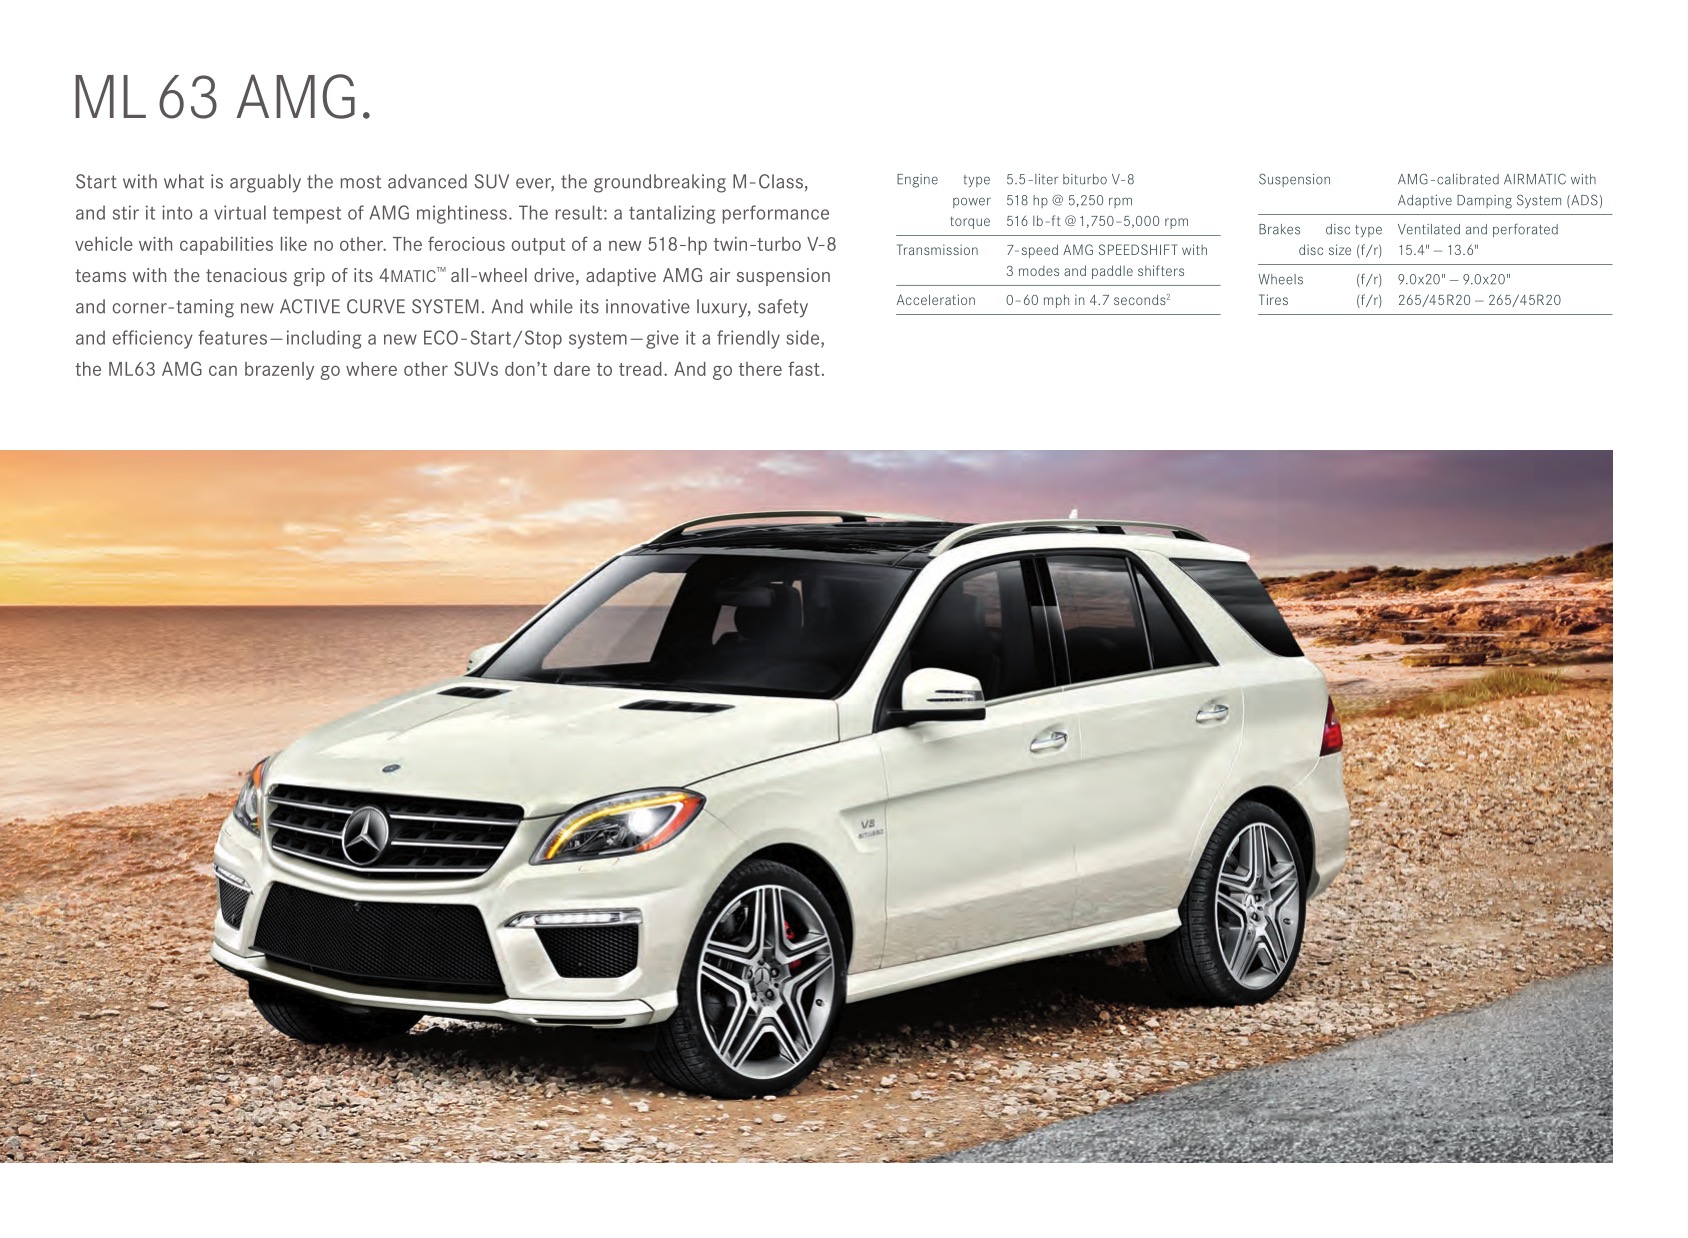 2012 Mercedes-Benz AMG Brochure Page 21